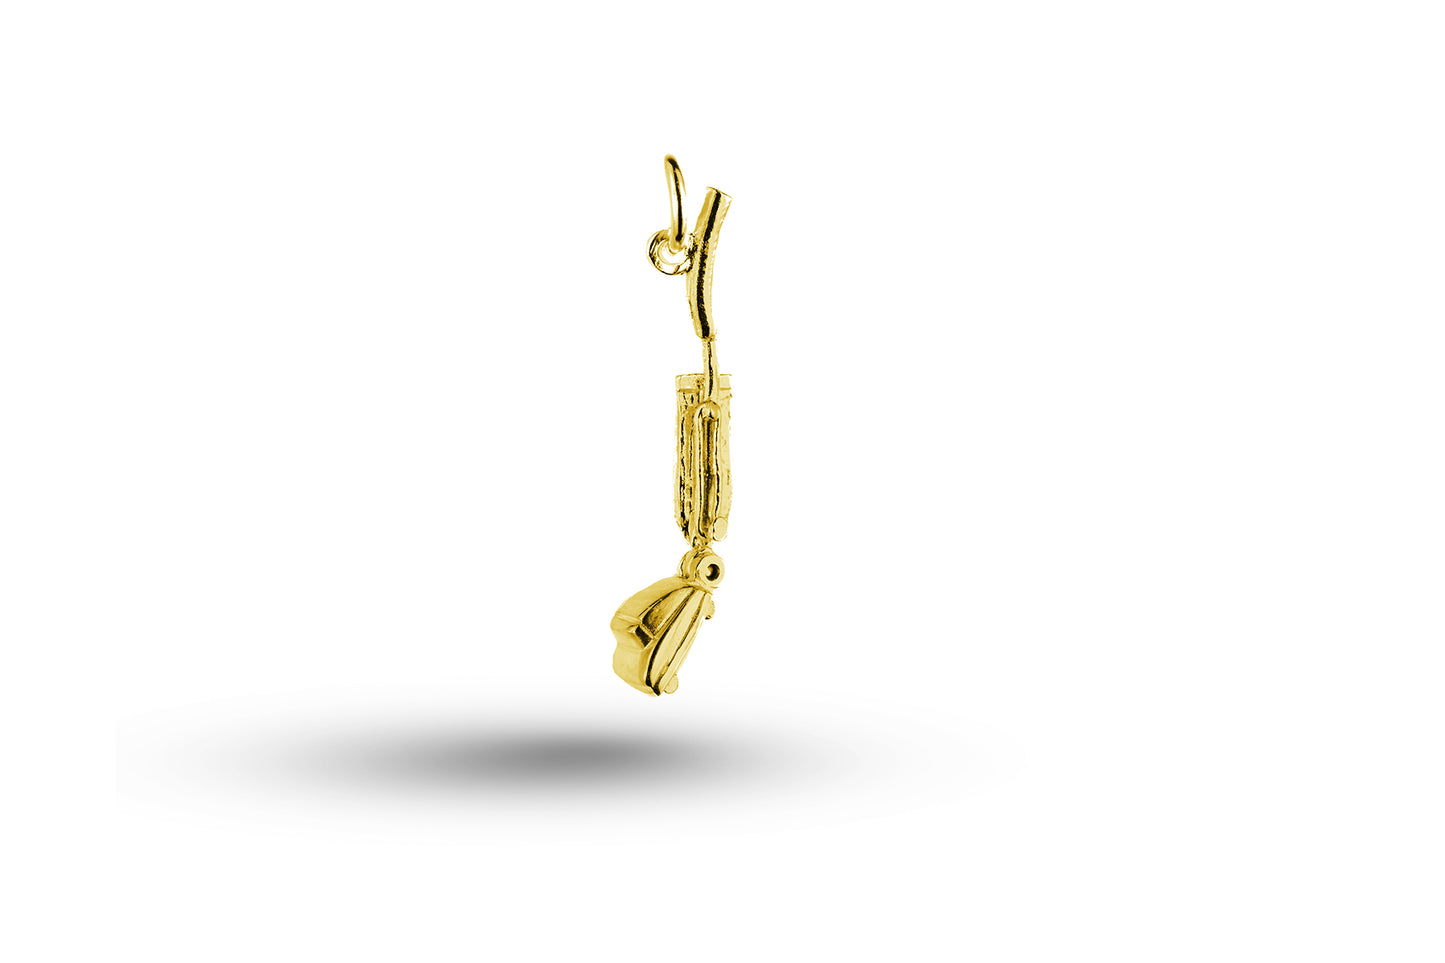 Yellow gold Vacuum Cleaner charm.